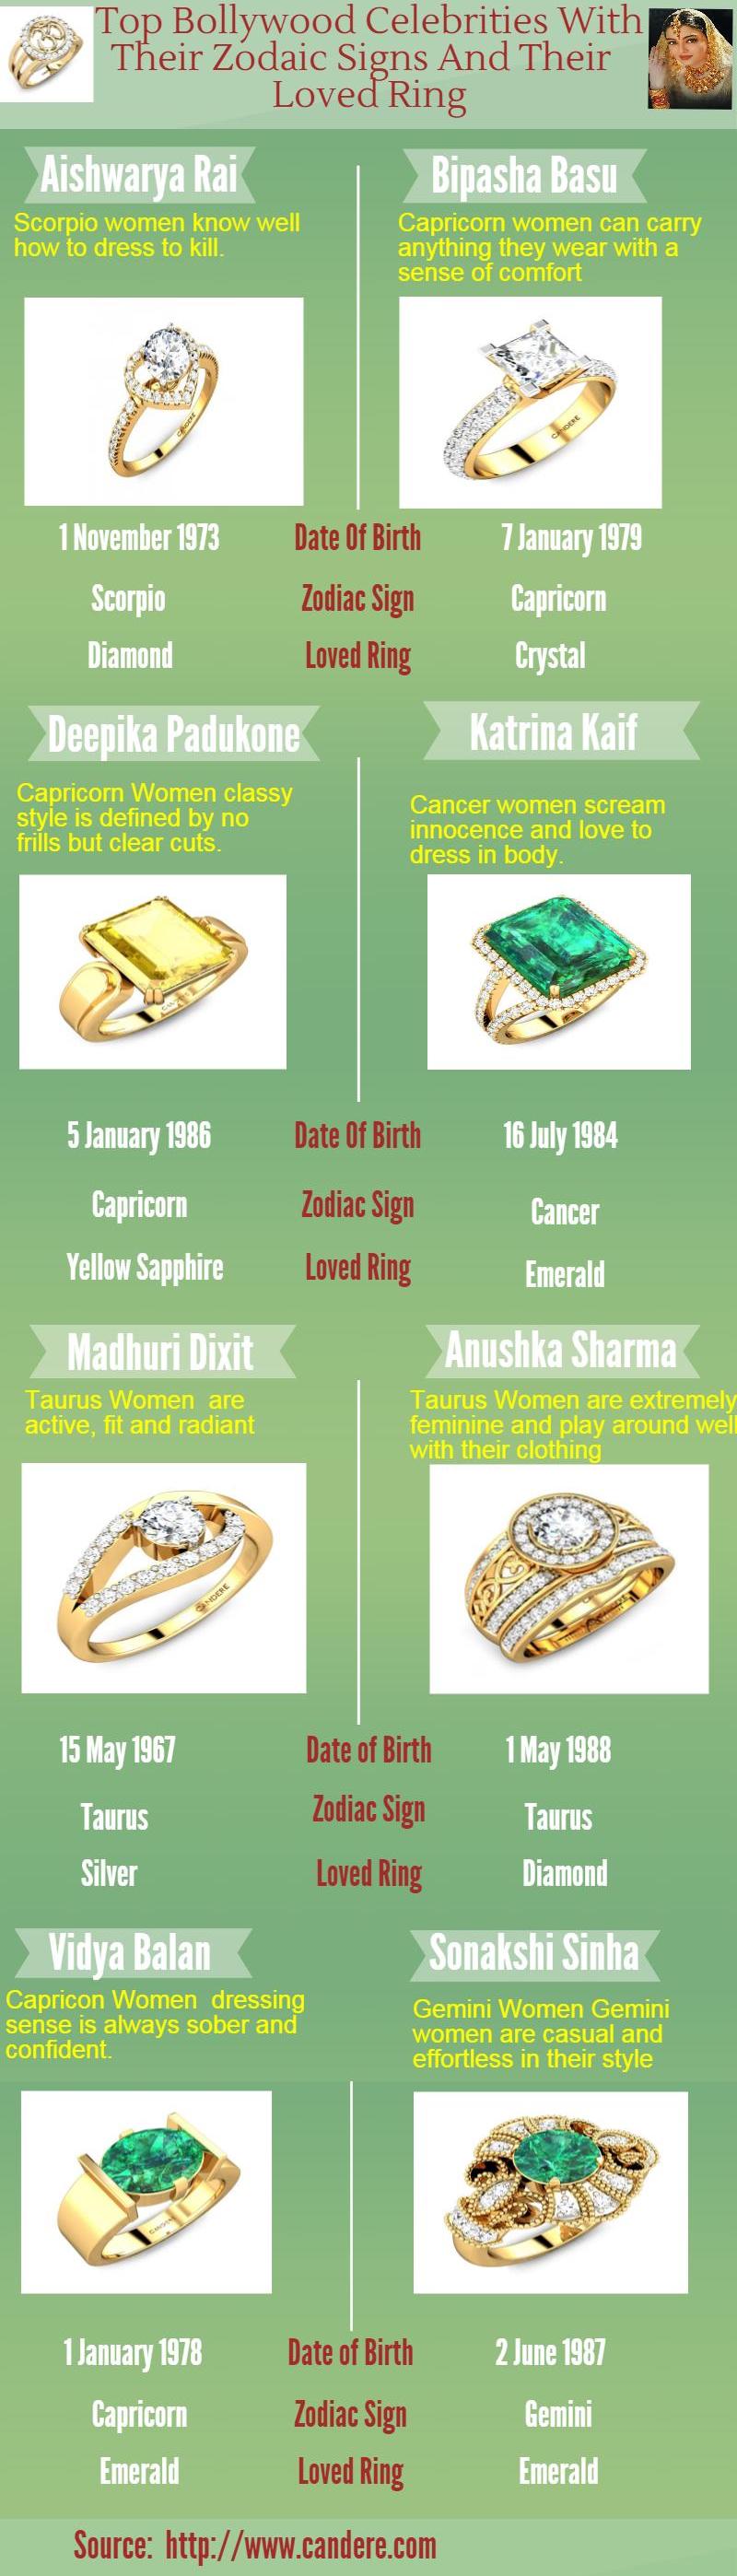 Bollywood Celebrities with Zodaic Signs and Loved Ring